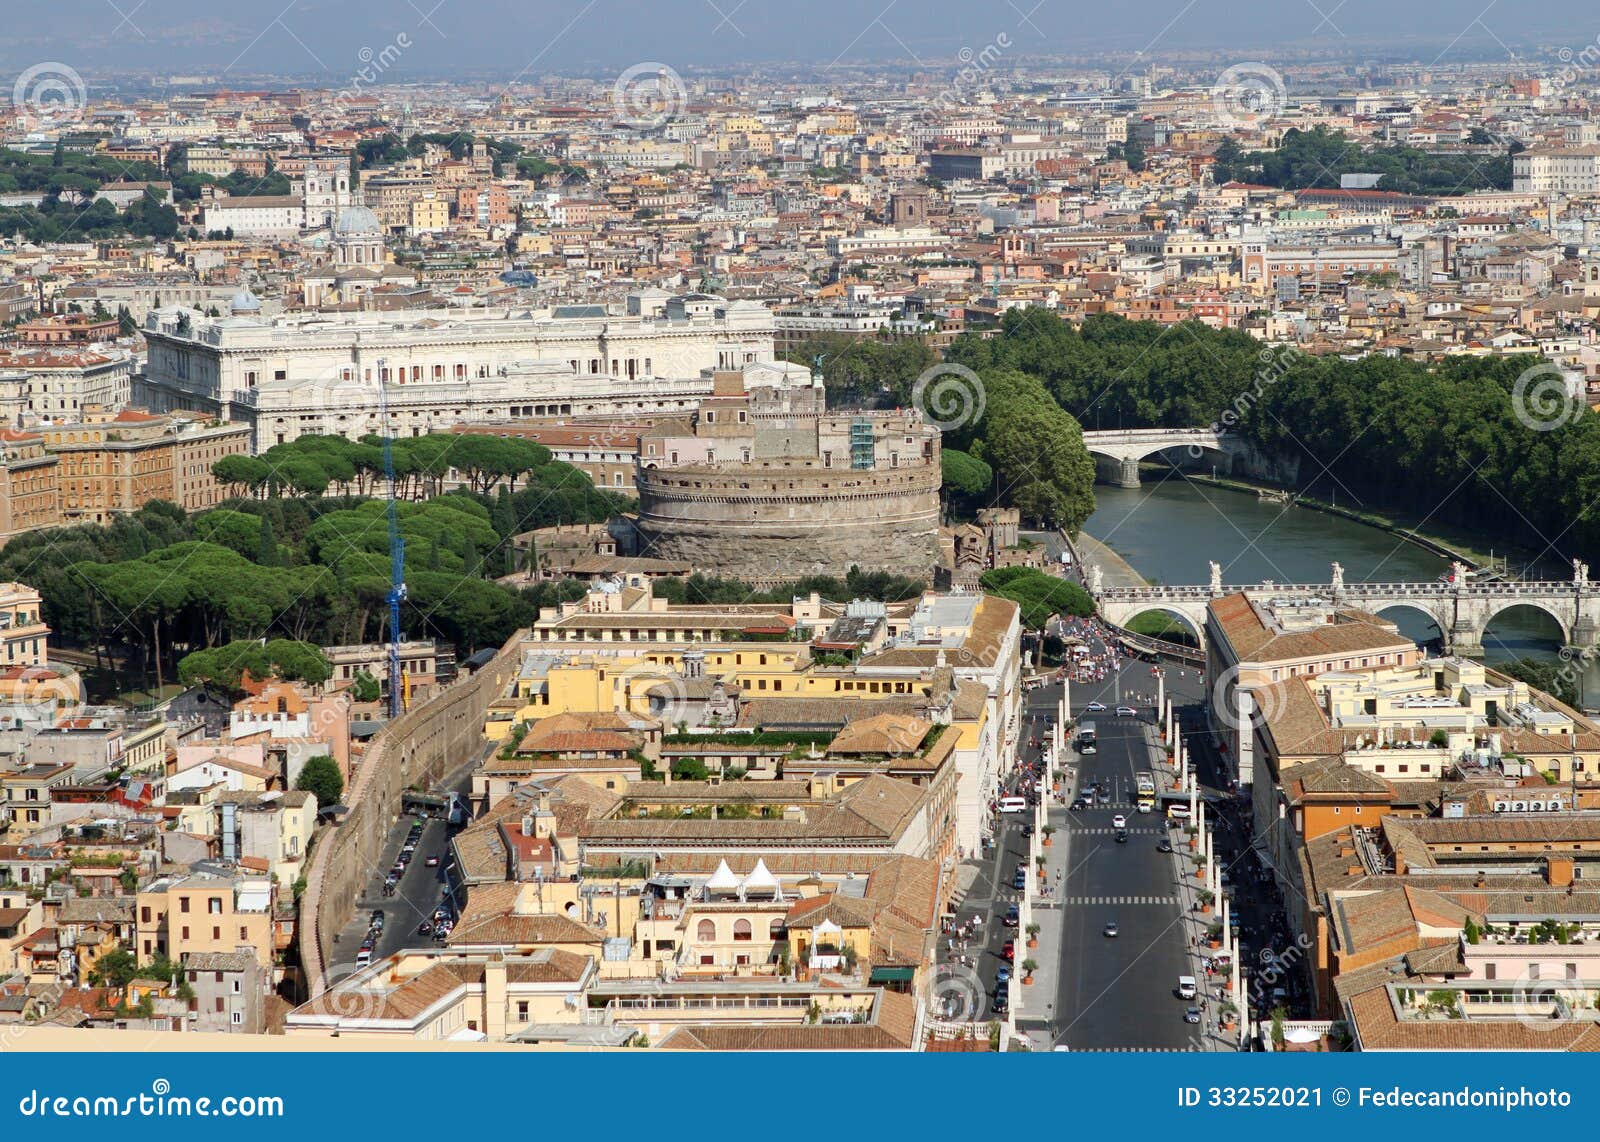 view of the city of rome with castel sant angelo